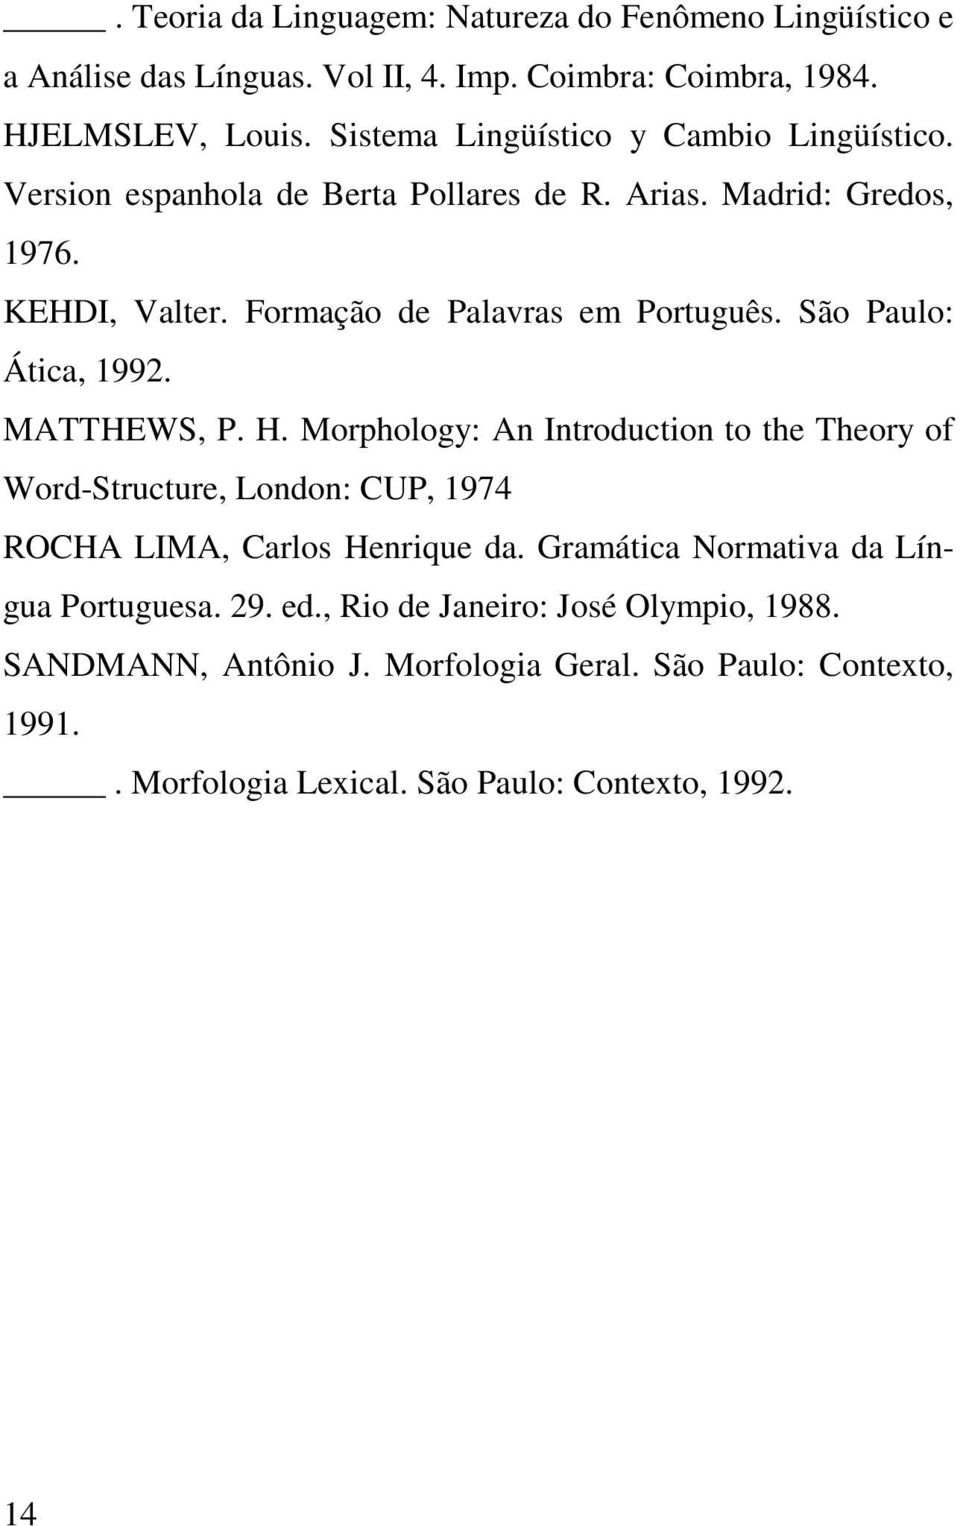 São Paulo: Ática, 1992. MATTHEWS, P. H. Morphology: An Introduction to the Theory of Word-Structure, London: CUP, 1974 ROCHA LIMA, Carlos Henrique da.